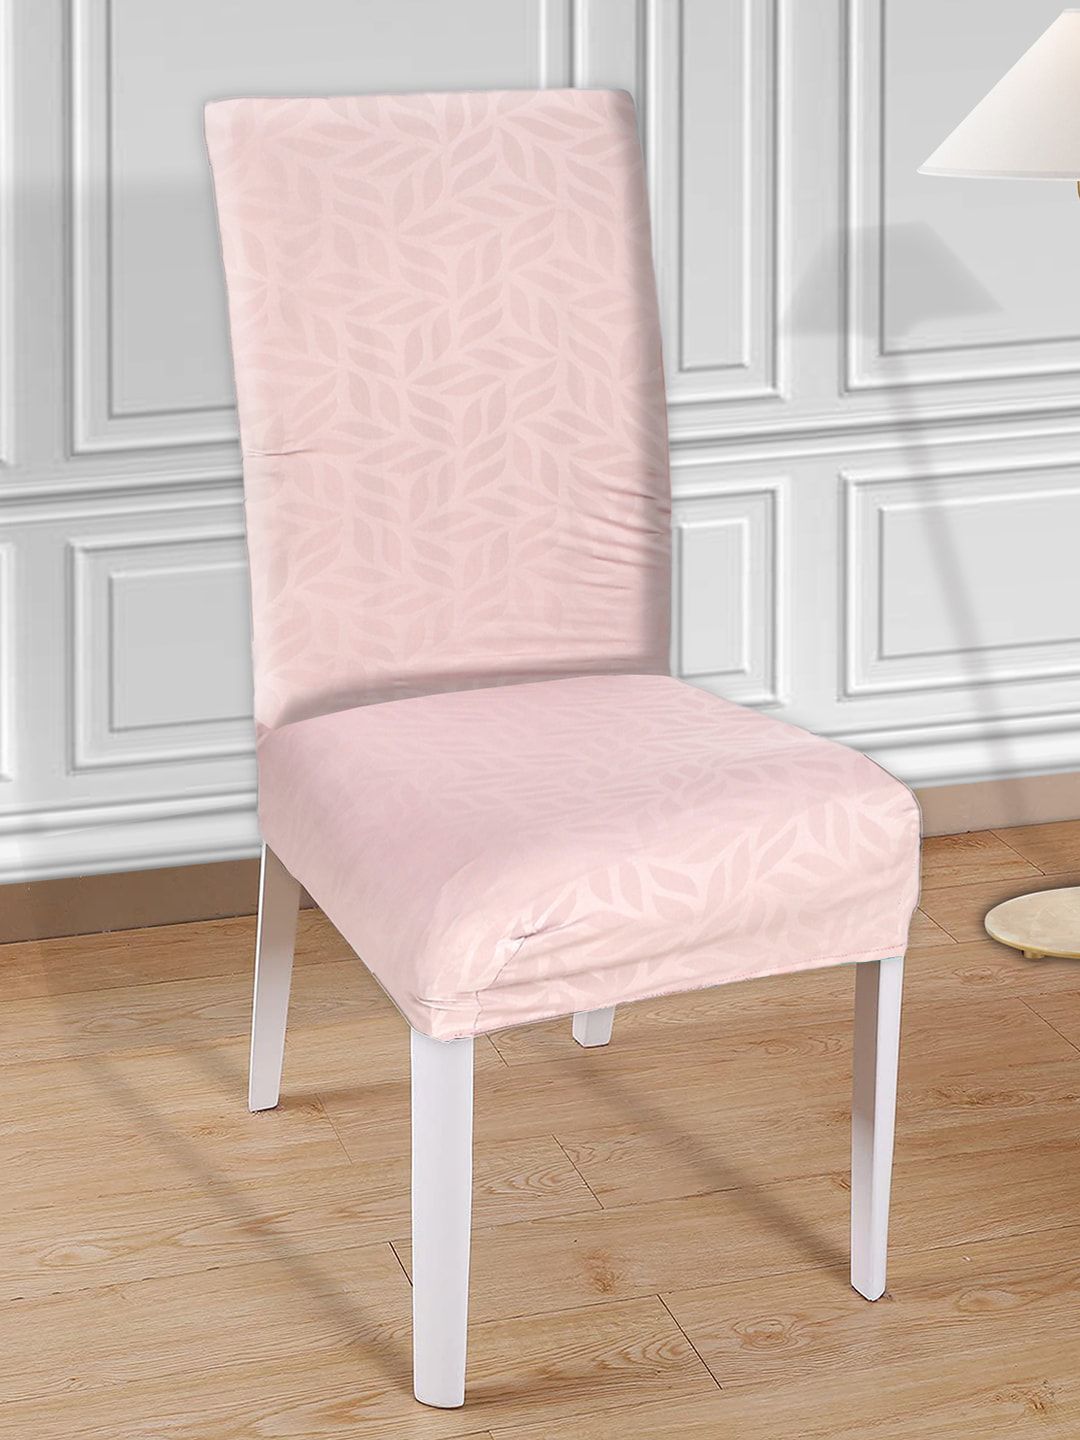 Kuber Industries Set of 2 Pink Floral Printed Chair Cover Price in India